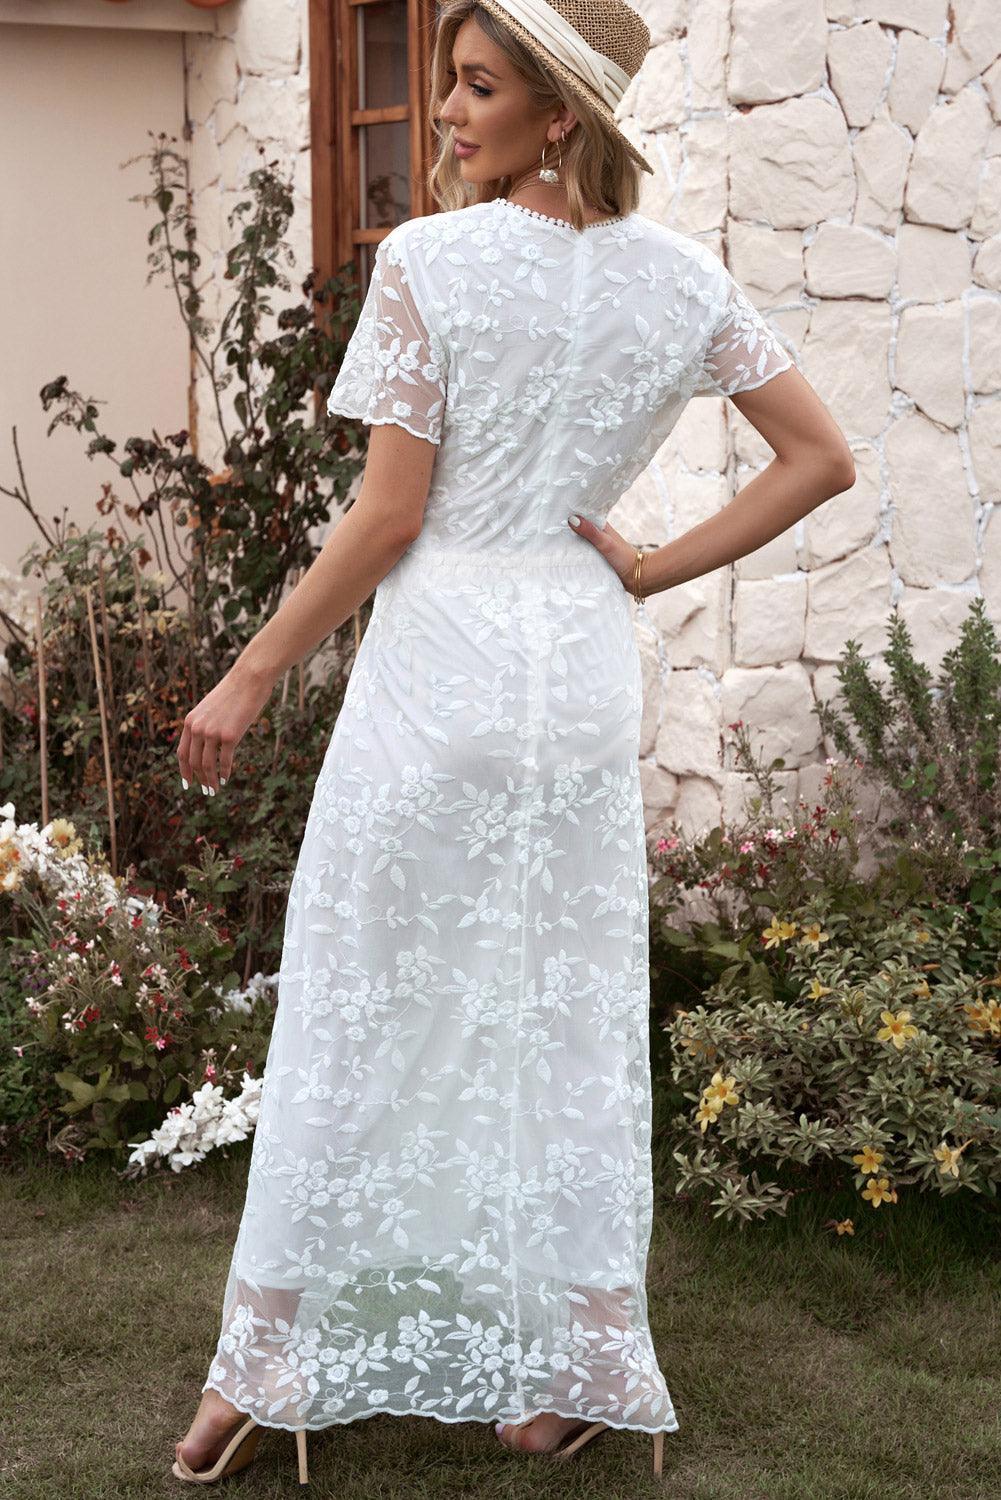 Marry Me Embroidered White Lace Maxi Dress - MXSTUDIO.COM